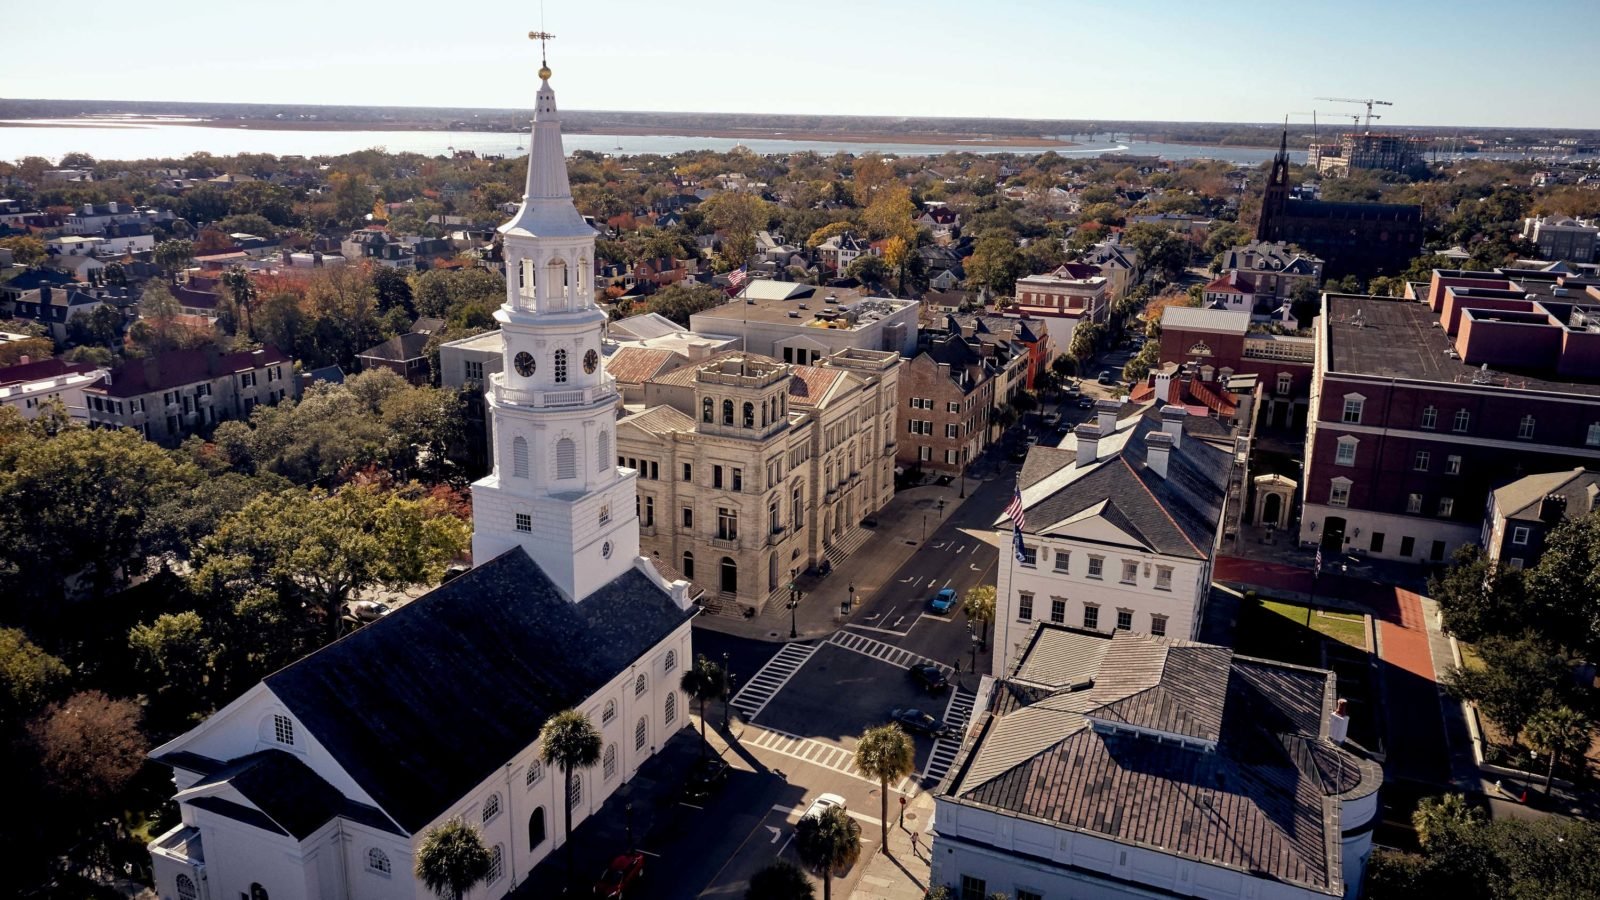 An Insider's Guide to Charleston